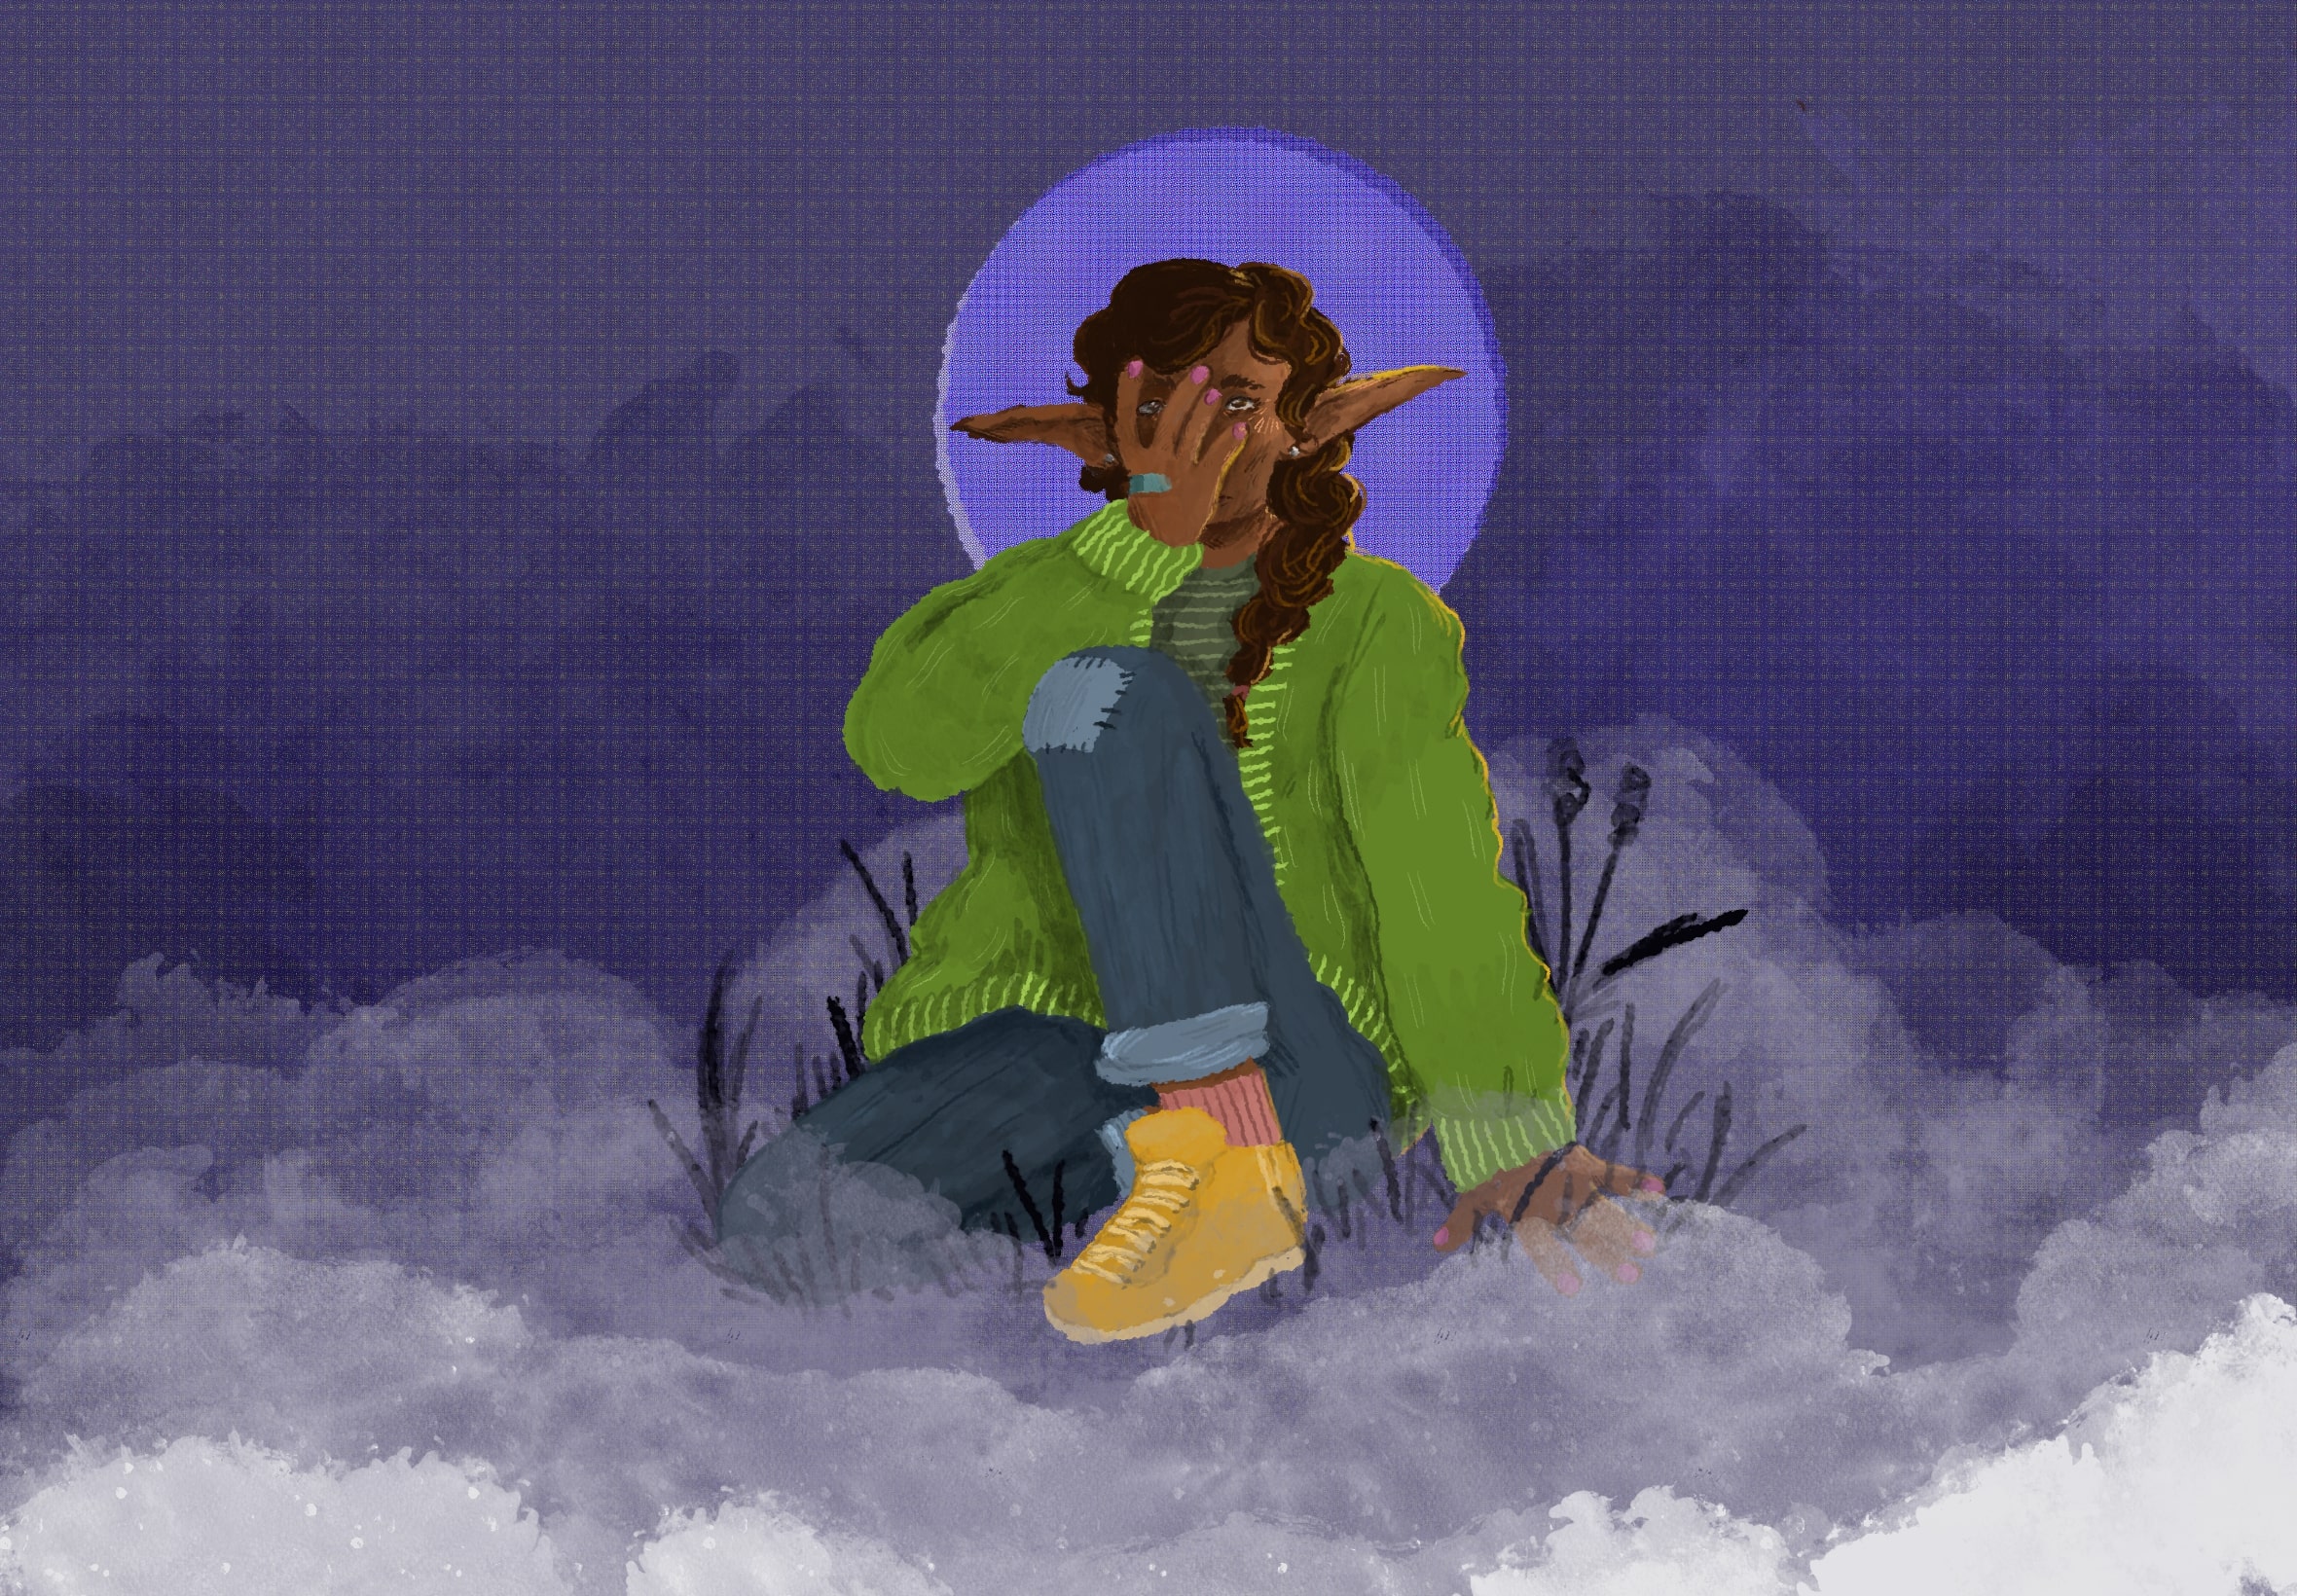 A digital painting of a girl with brown skin and long dark hair. She is kneeling and covering one eye, peering through her fingers. Around her is fog against a purple background.